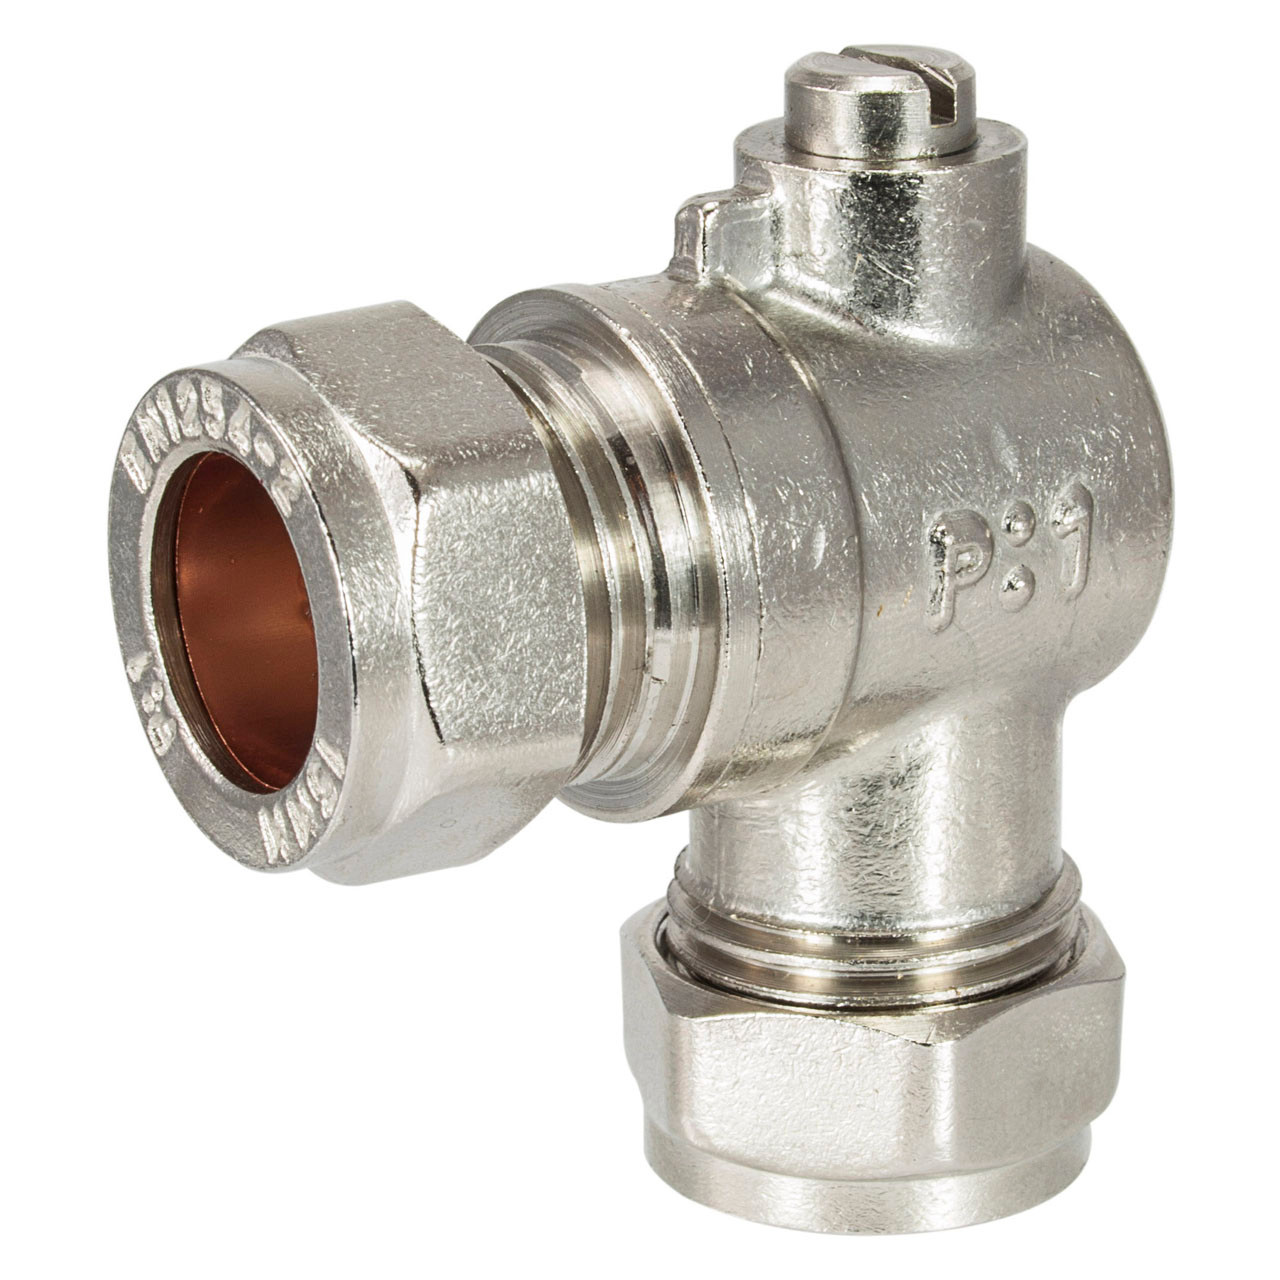 Photograph of Embrass 15mm Compression L/P Chrome Angled Isolating Valve